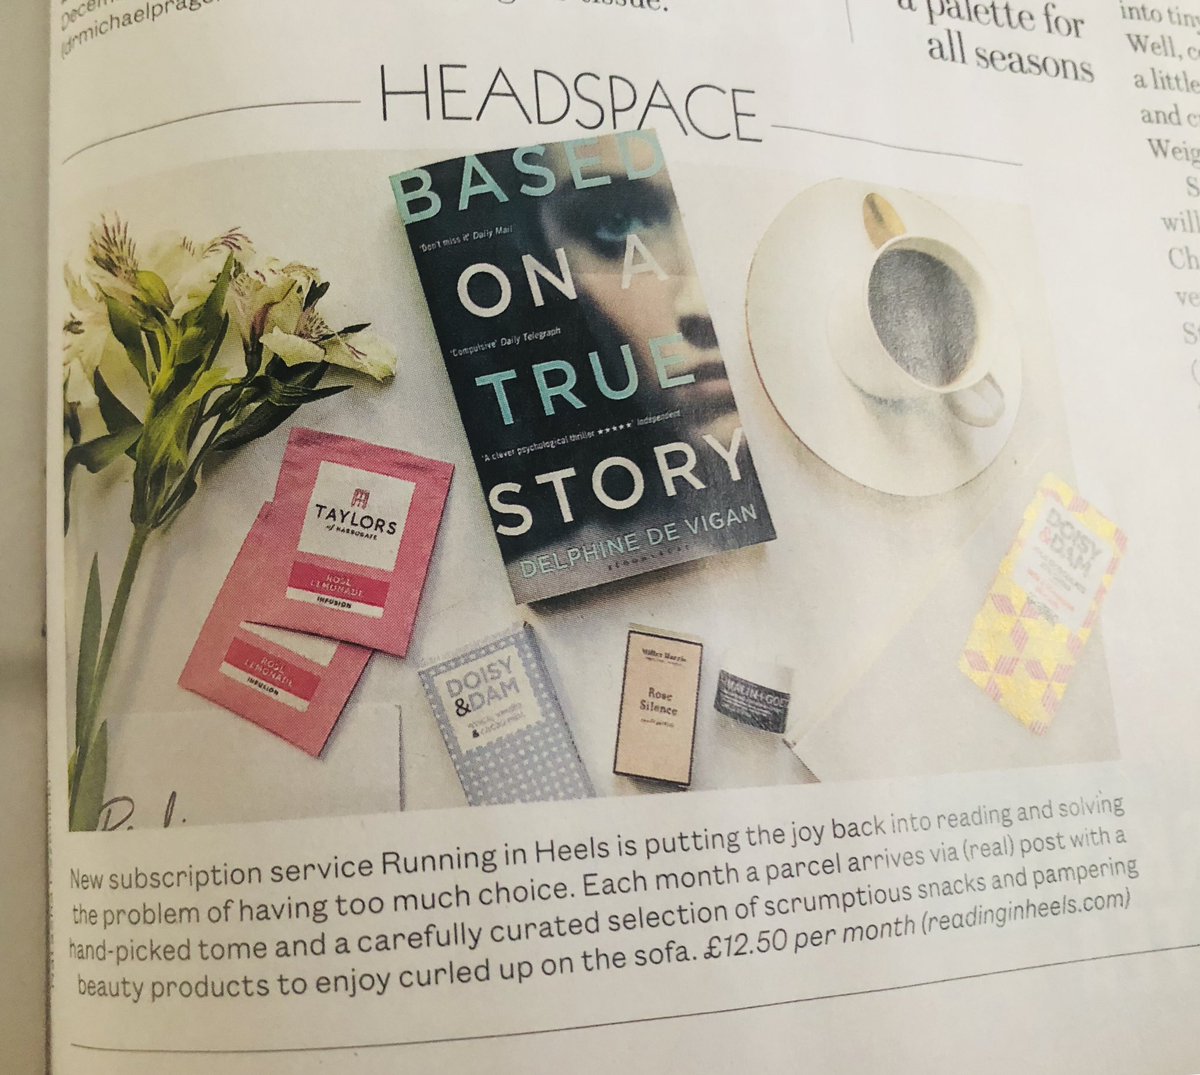 As a founding customer I gotta say I love this monthly moment - and I loved that book @DelphineDeVigan... Shout out to @AliceRevel and @ReadingInHeels in today’s @ESMagOfficial